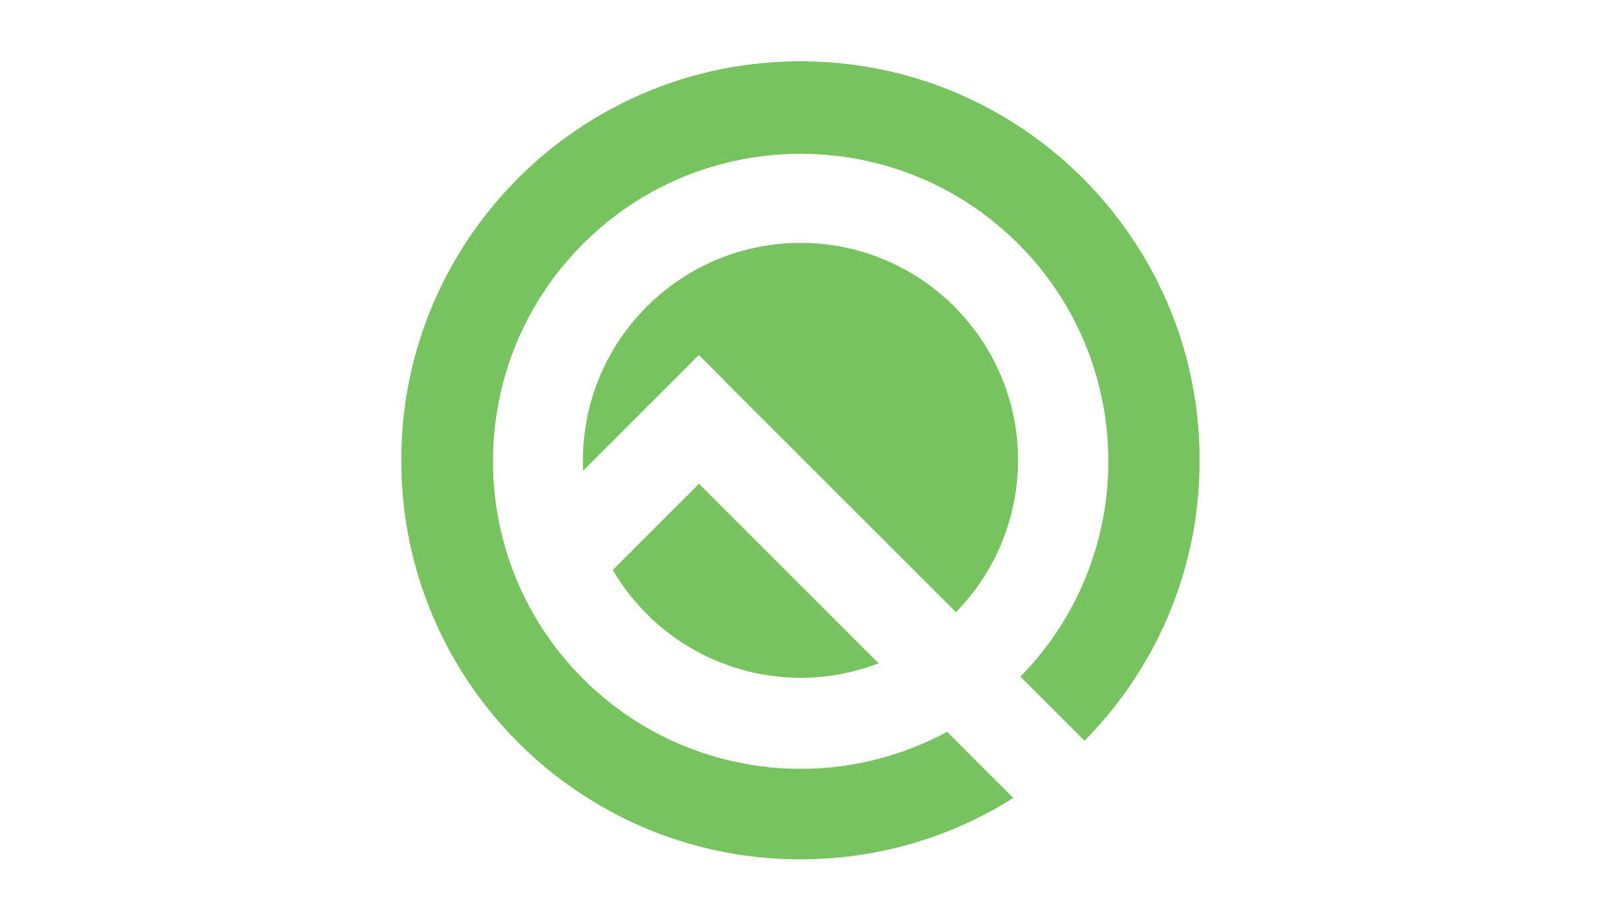 Android Q: Is it ready for prime time or not?